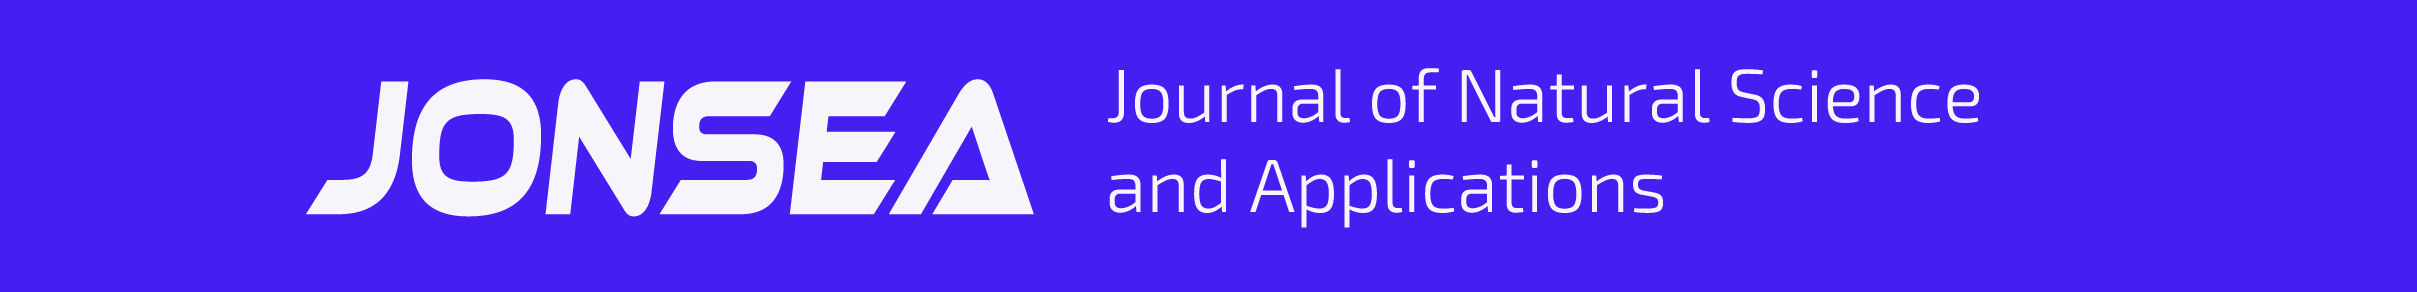 Journal of Natural Science and Applications